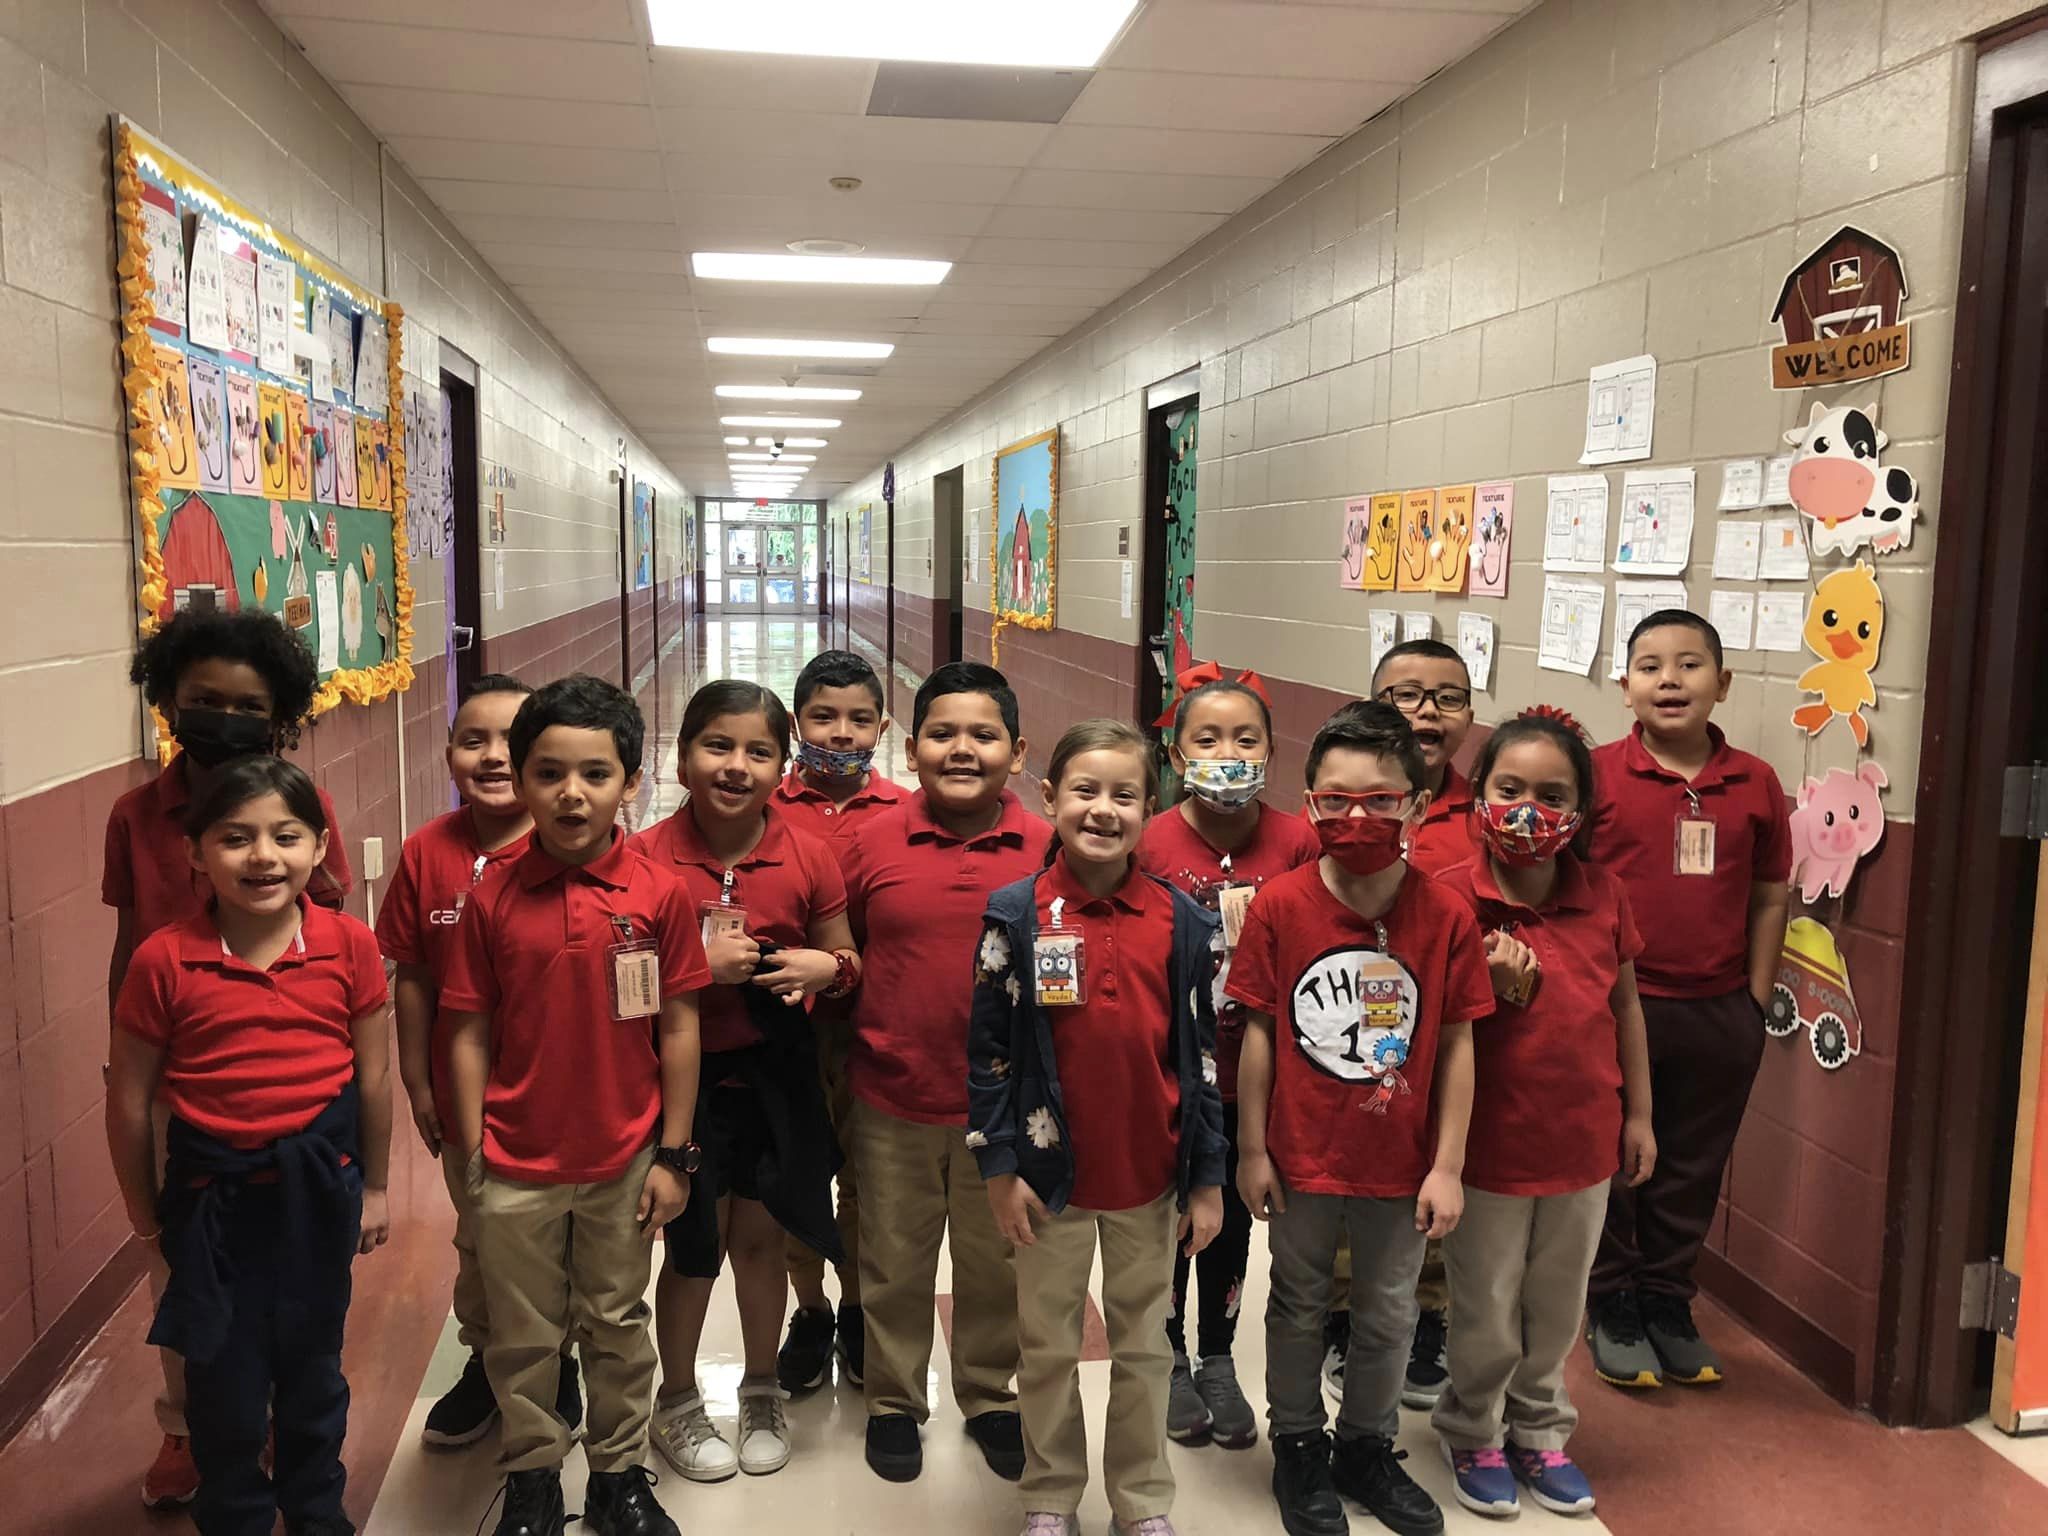 Ms. Black's Class wearing red